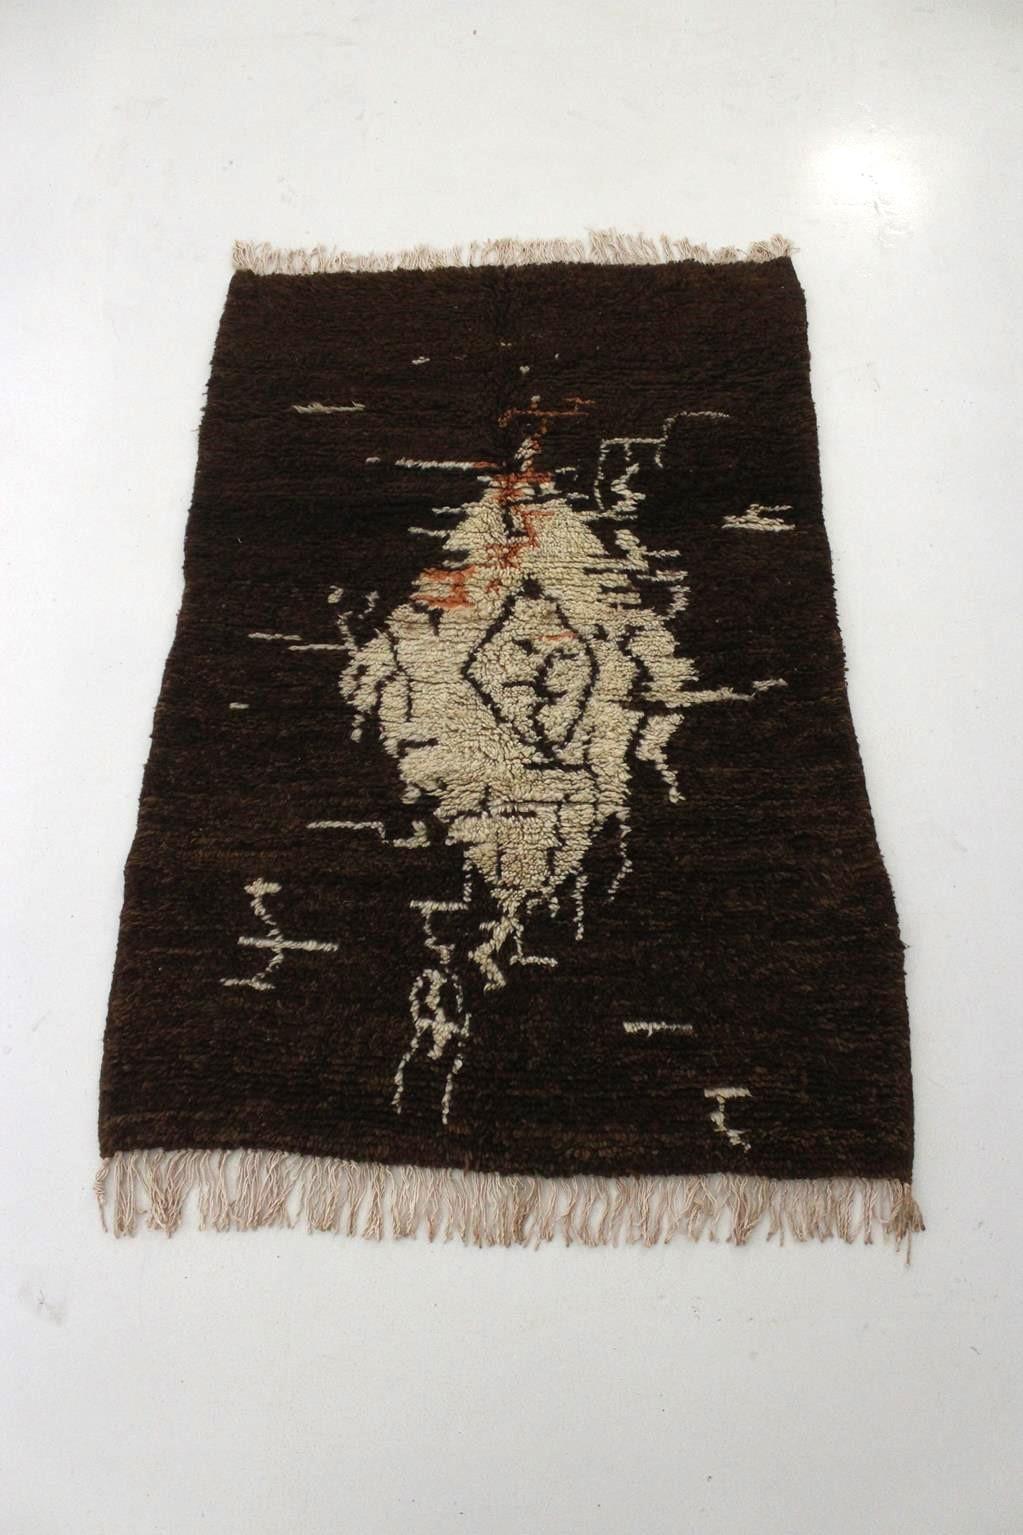 Vintage Moroccan Azilal rug - Brown/beige - 3.5x5.4feet / 108x165cm In Good Condition For Sale In Marrakech, MA